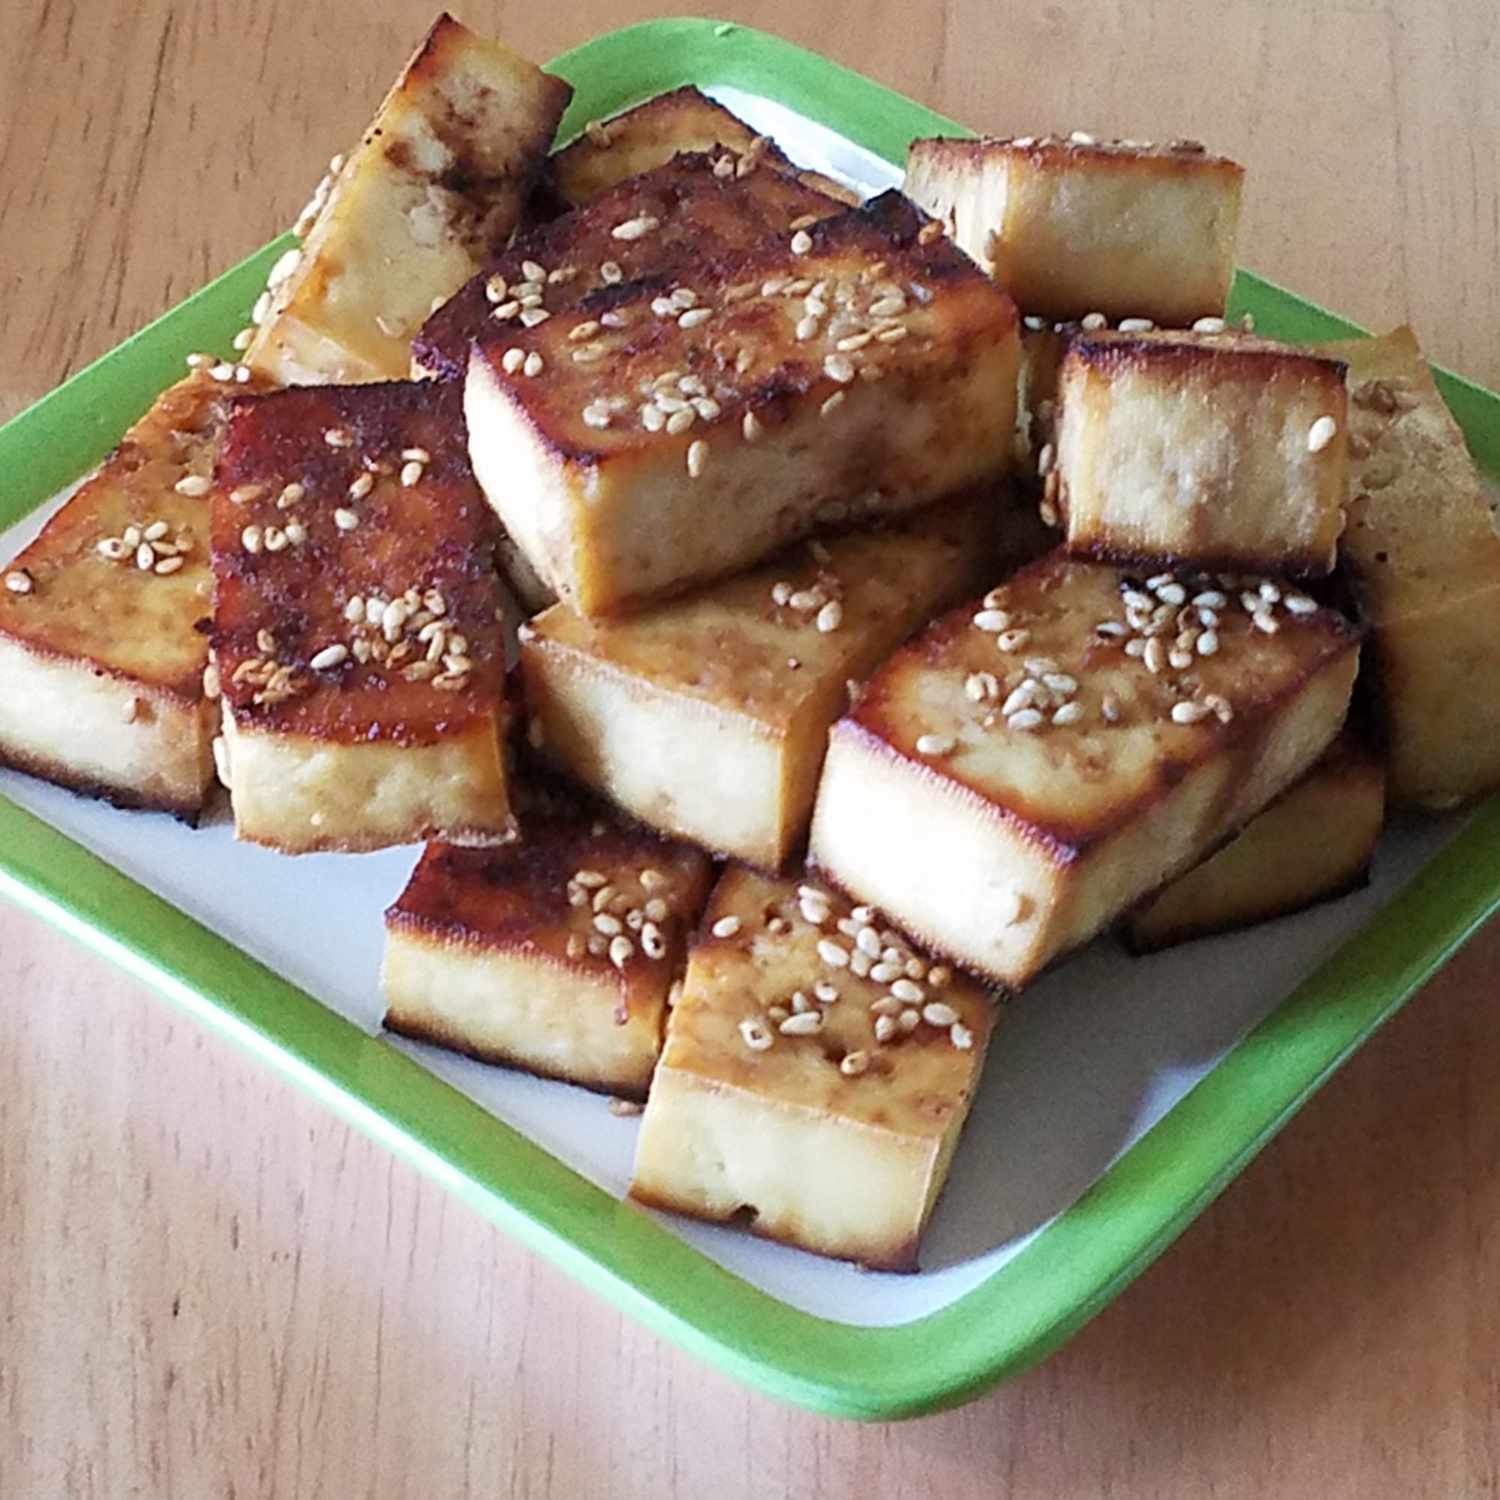 Baked Tofu on a green plate